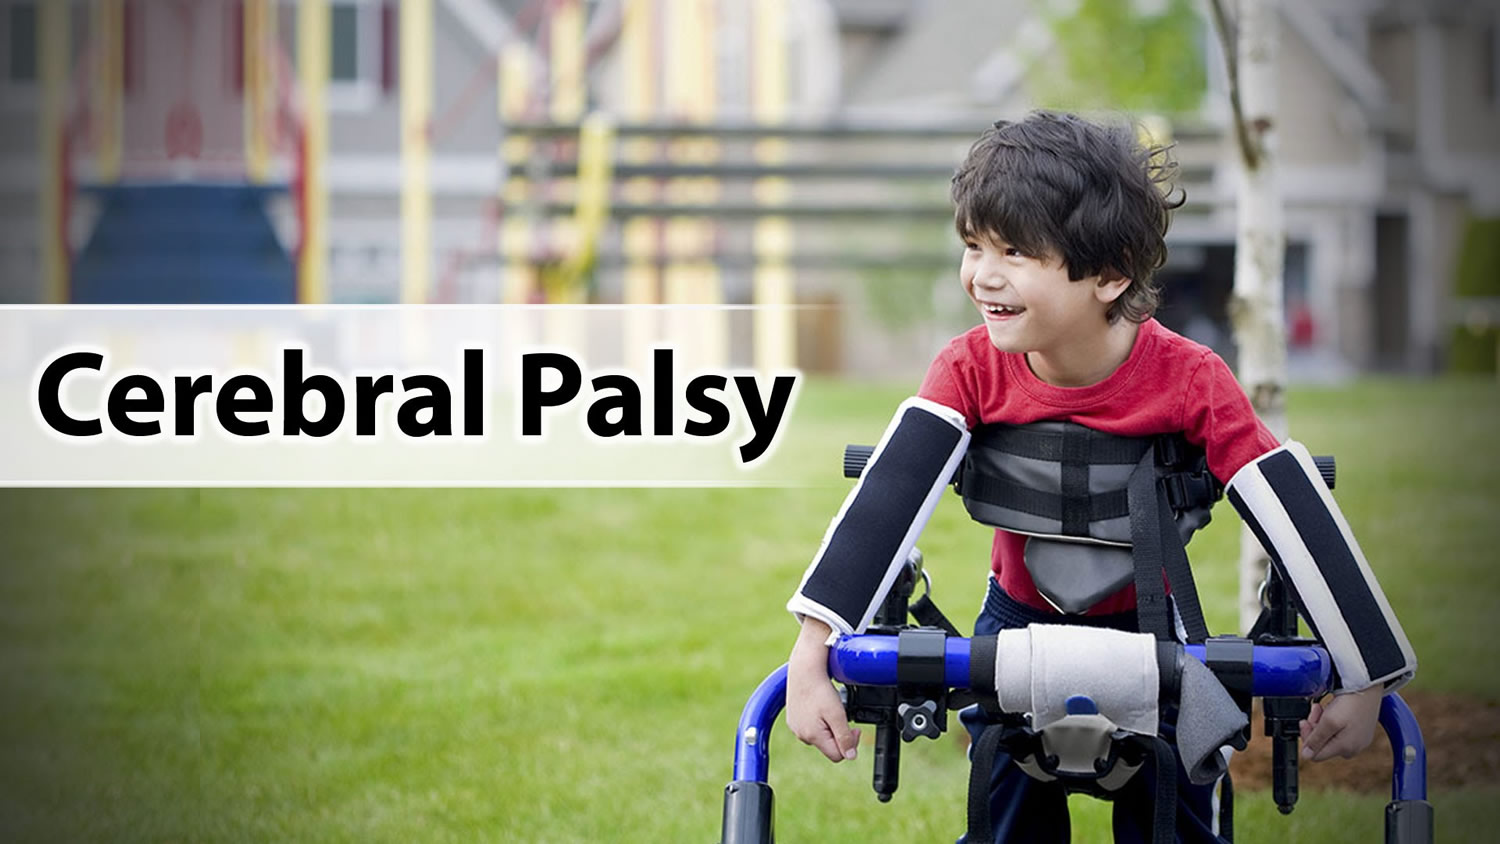 Is cerebral palsy what Cerebral Palsy